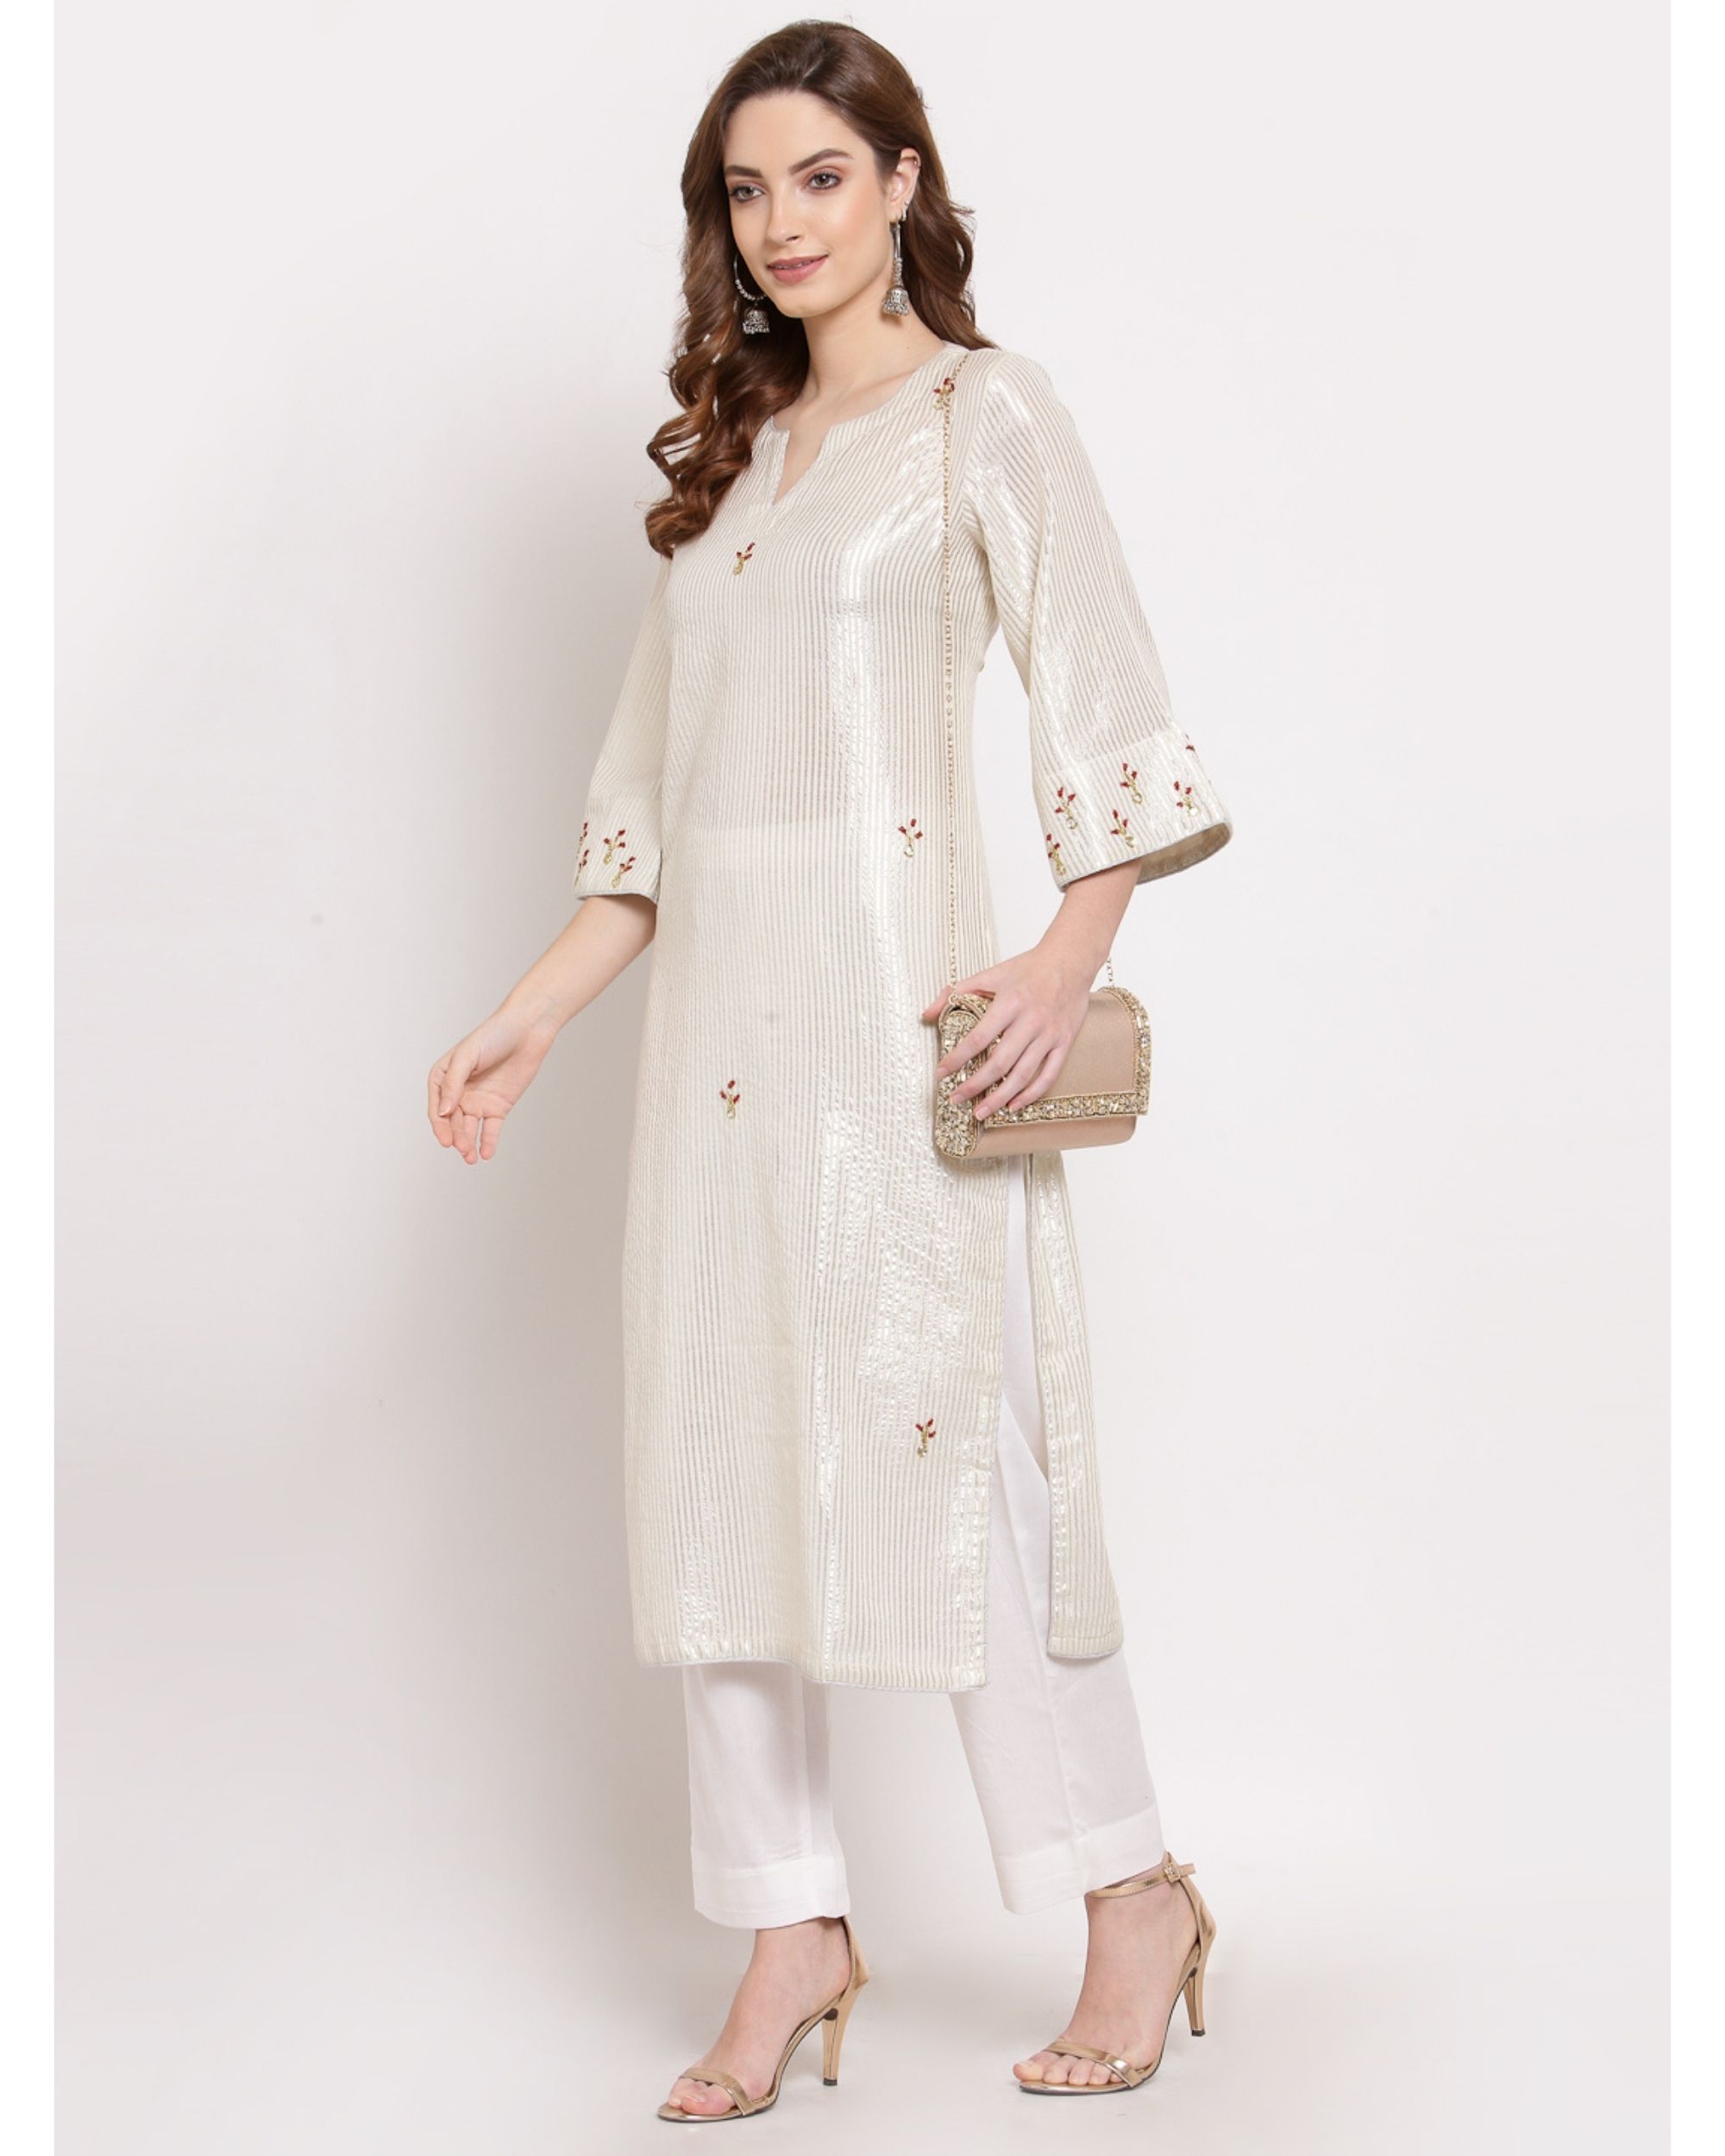 Off-white striped embroidered kurta with pant - set of two